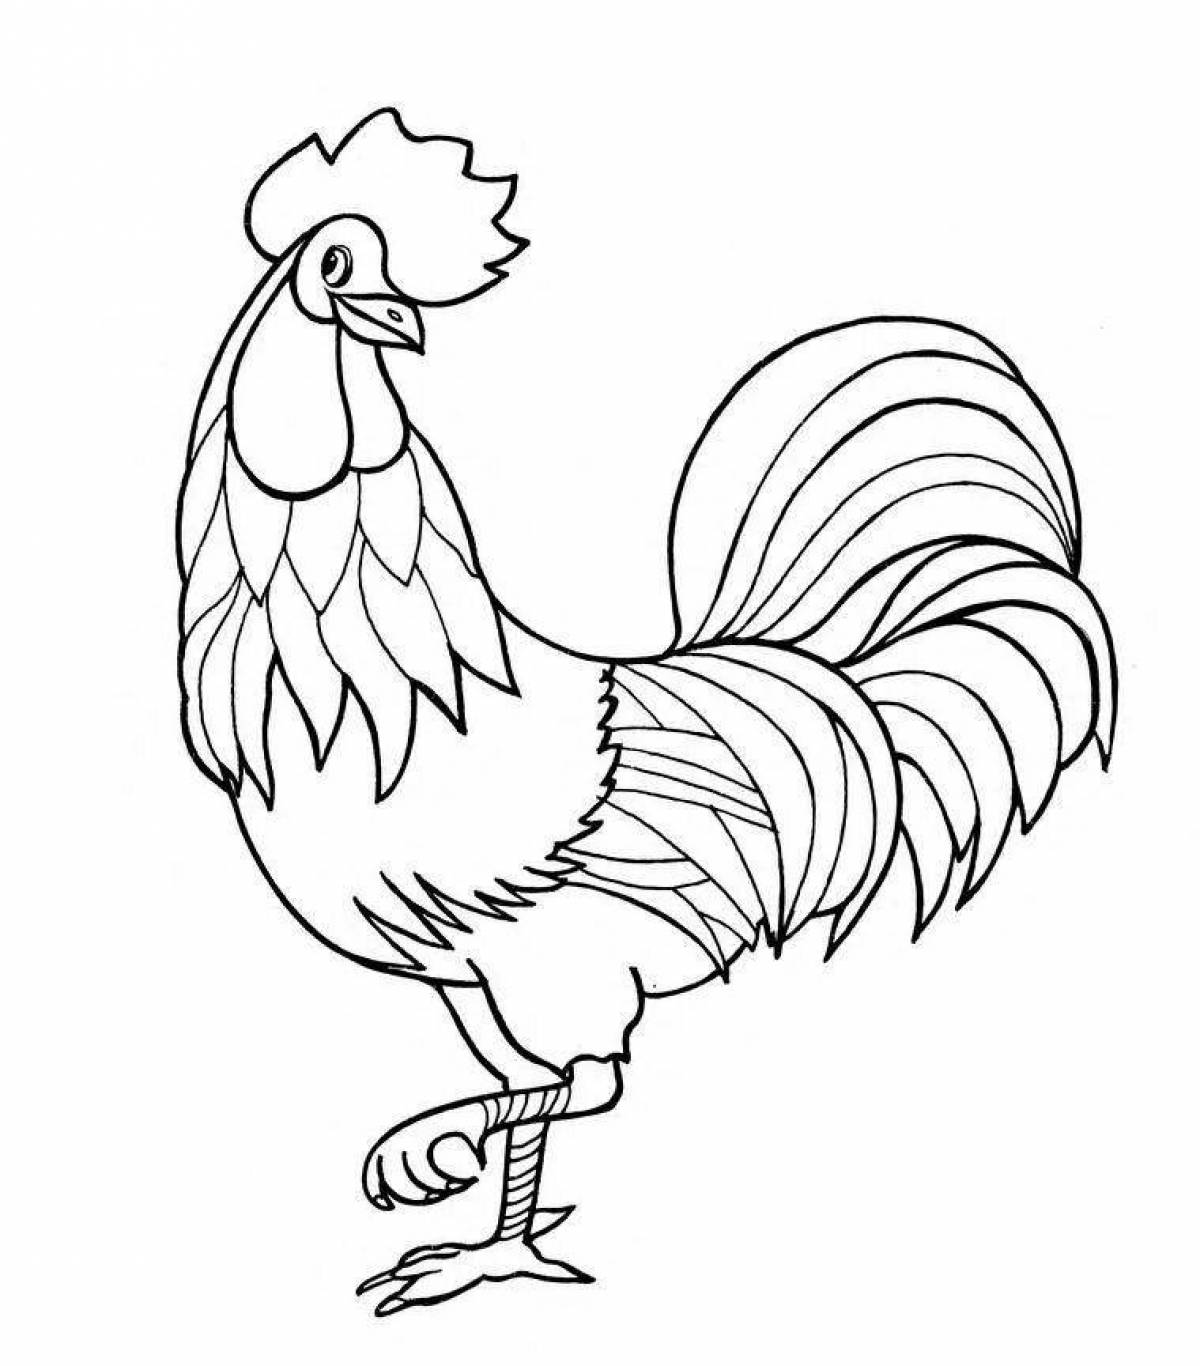 Children's rooster coloring book